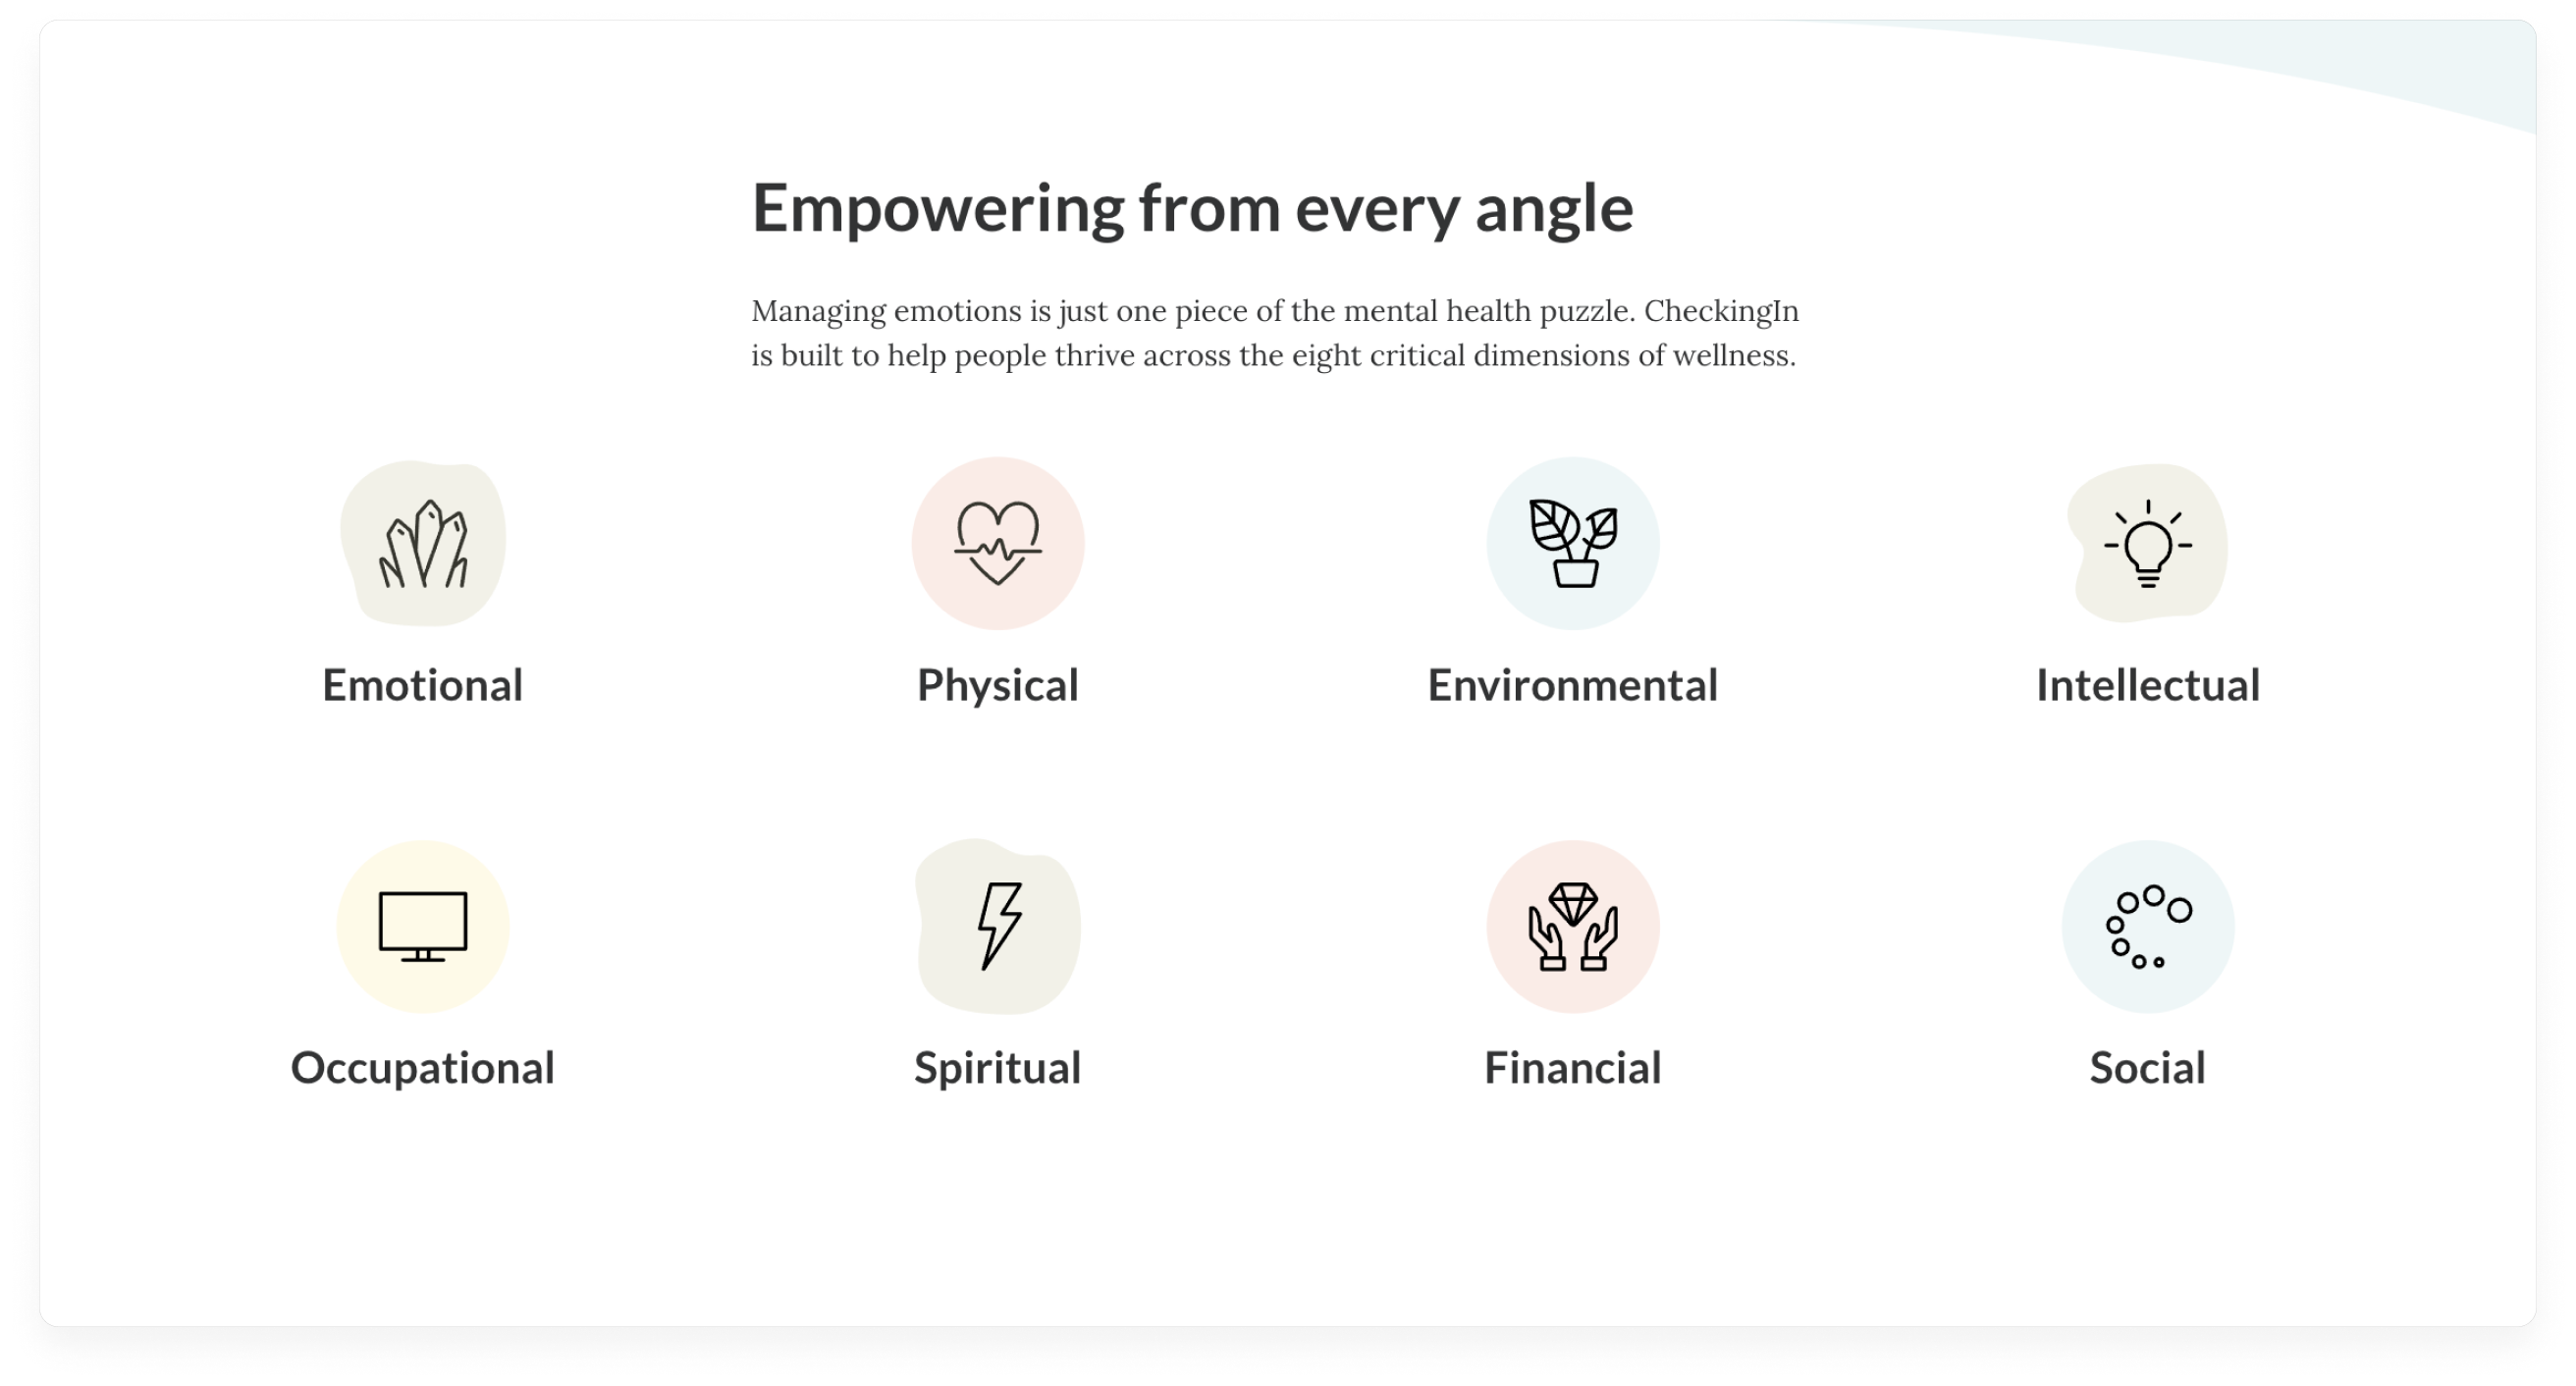 Empowering from every angle - Managing emotions is just one piece of the mental health puzzle. CheckingIn is built to help people thrive across the eight critical dimensions of wellness: emotional, physical, environmental, intellectual, occupational, spiritual, financial, social